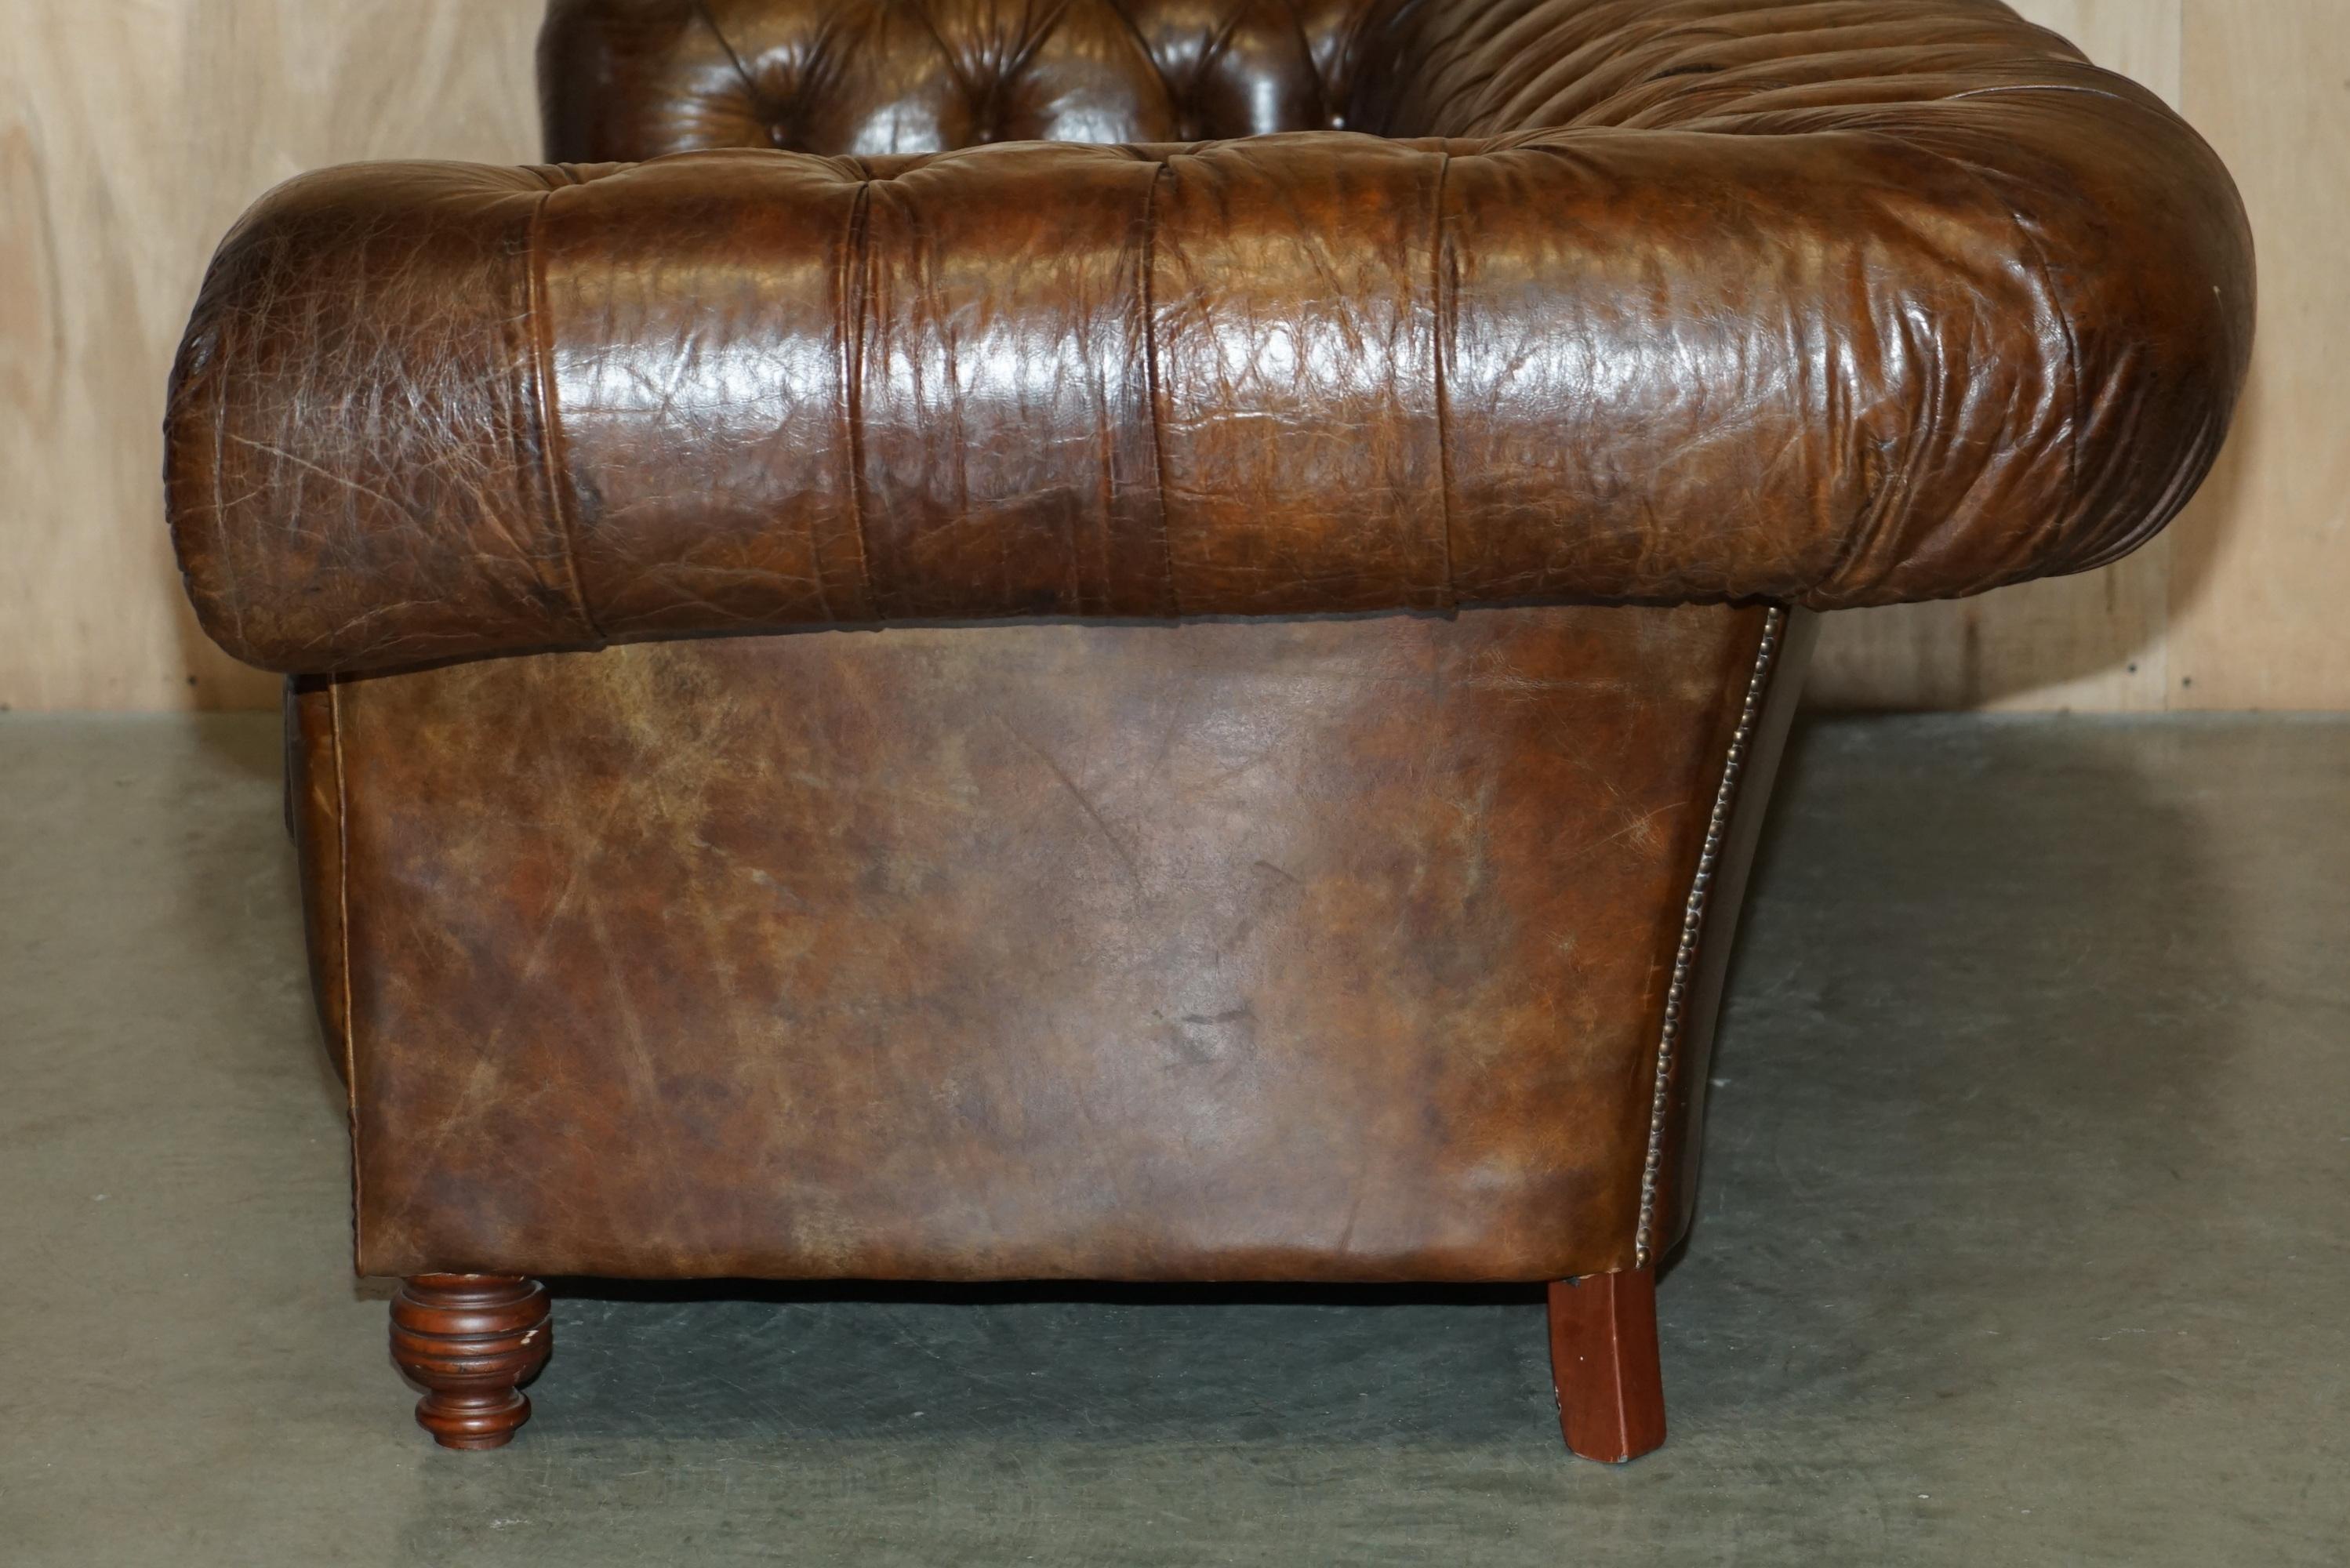 1 OF 2 TIMOTHY OULTON HERiTAGE BROWN VINTAGE LEATHER CHESTERFIELD HALO SOFAS For Sale 32